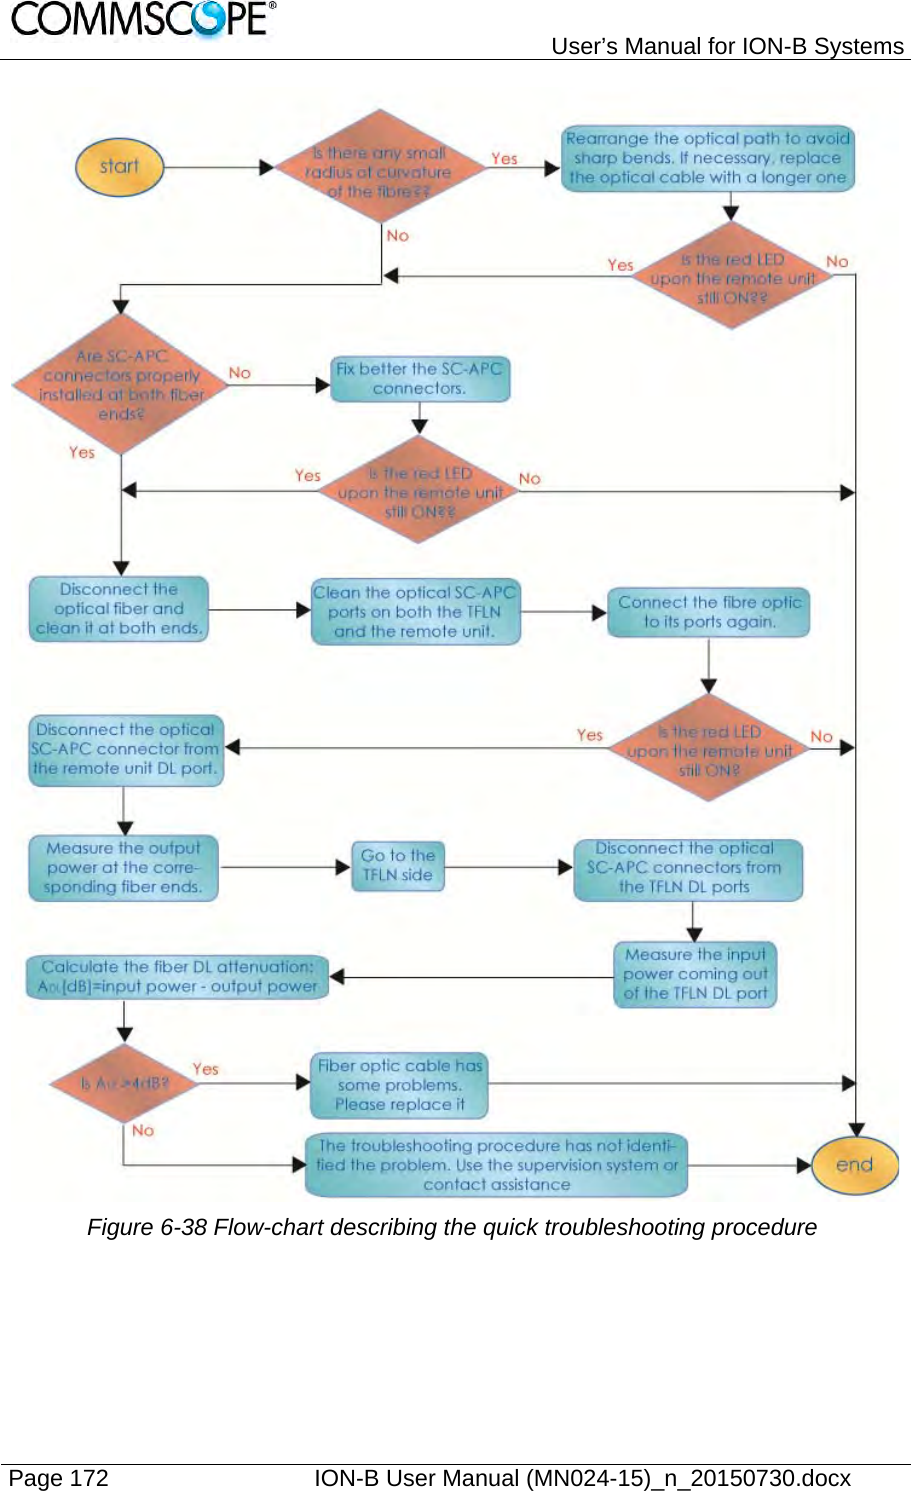   User’s Manual for ION-B Systems Page 172    ION-B User Manual (MN024-15)_n_20150730.docx   Figure 6-38 Flow-chart describing the quick troubleshooting procedure   